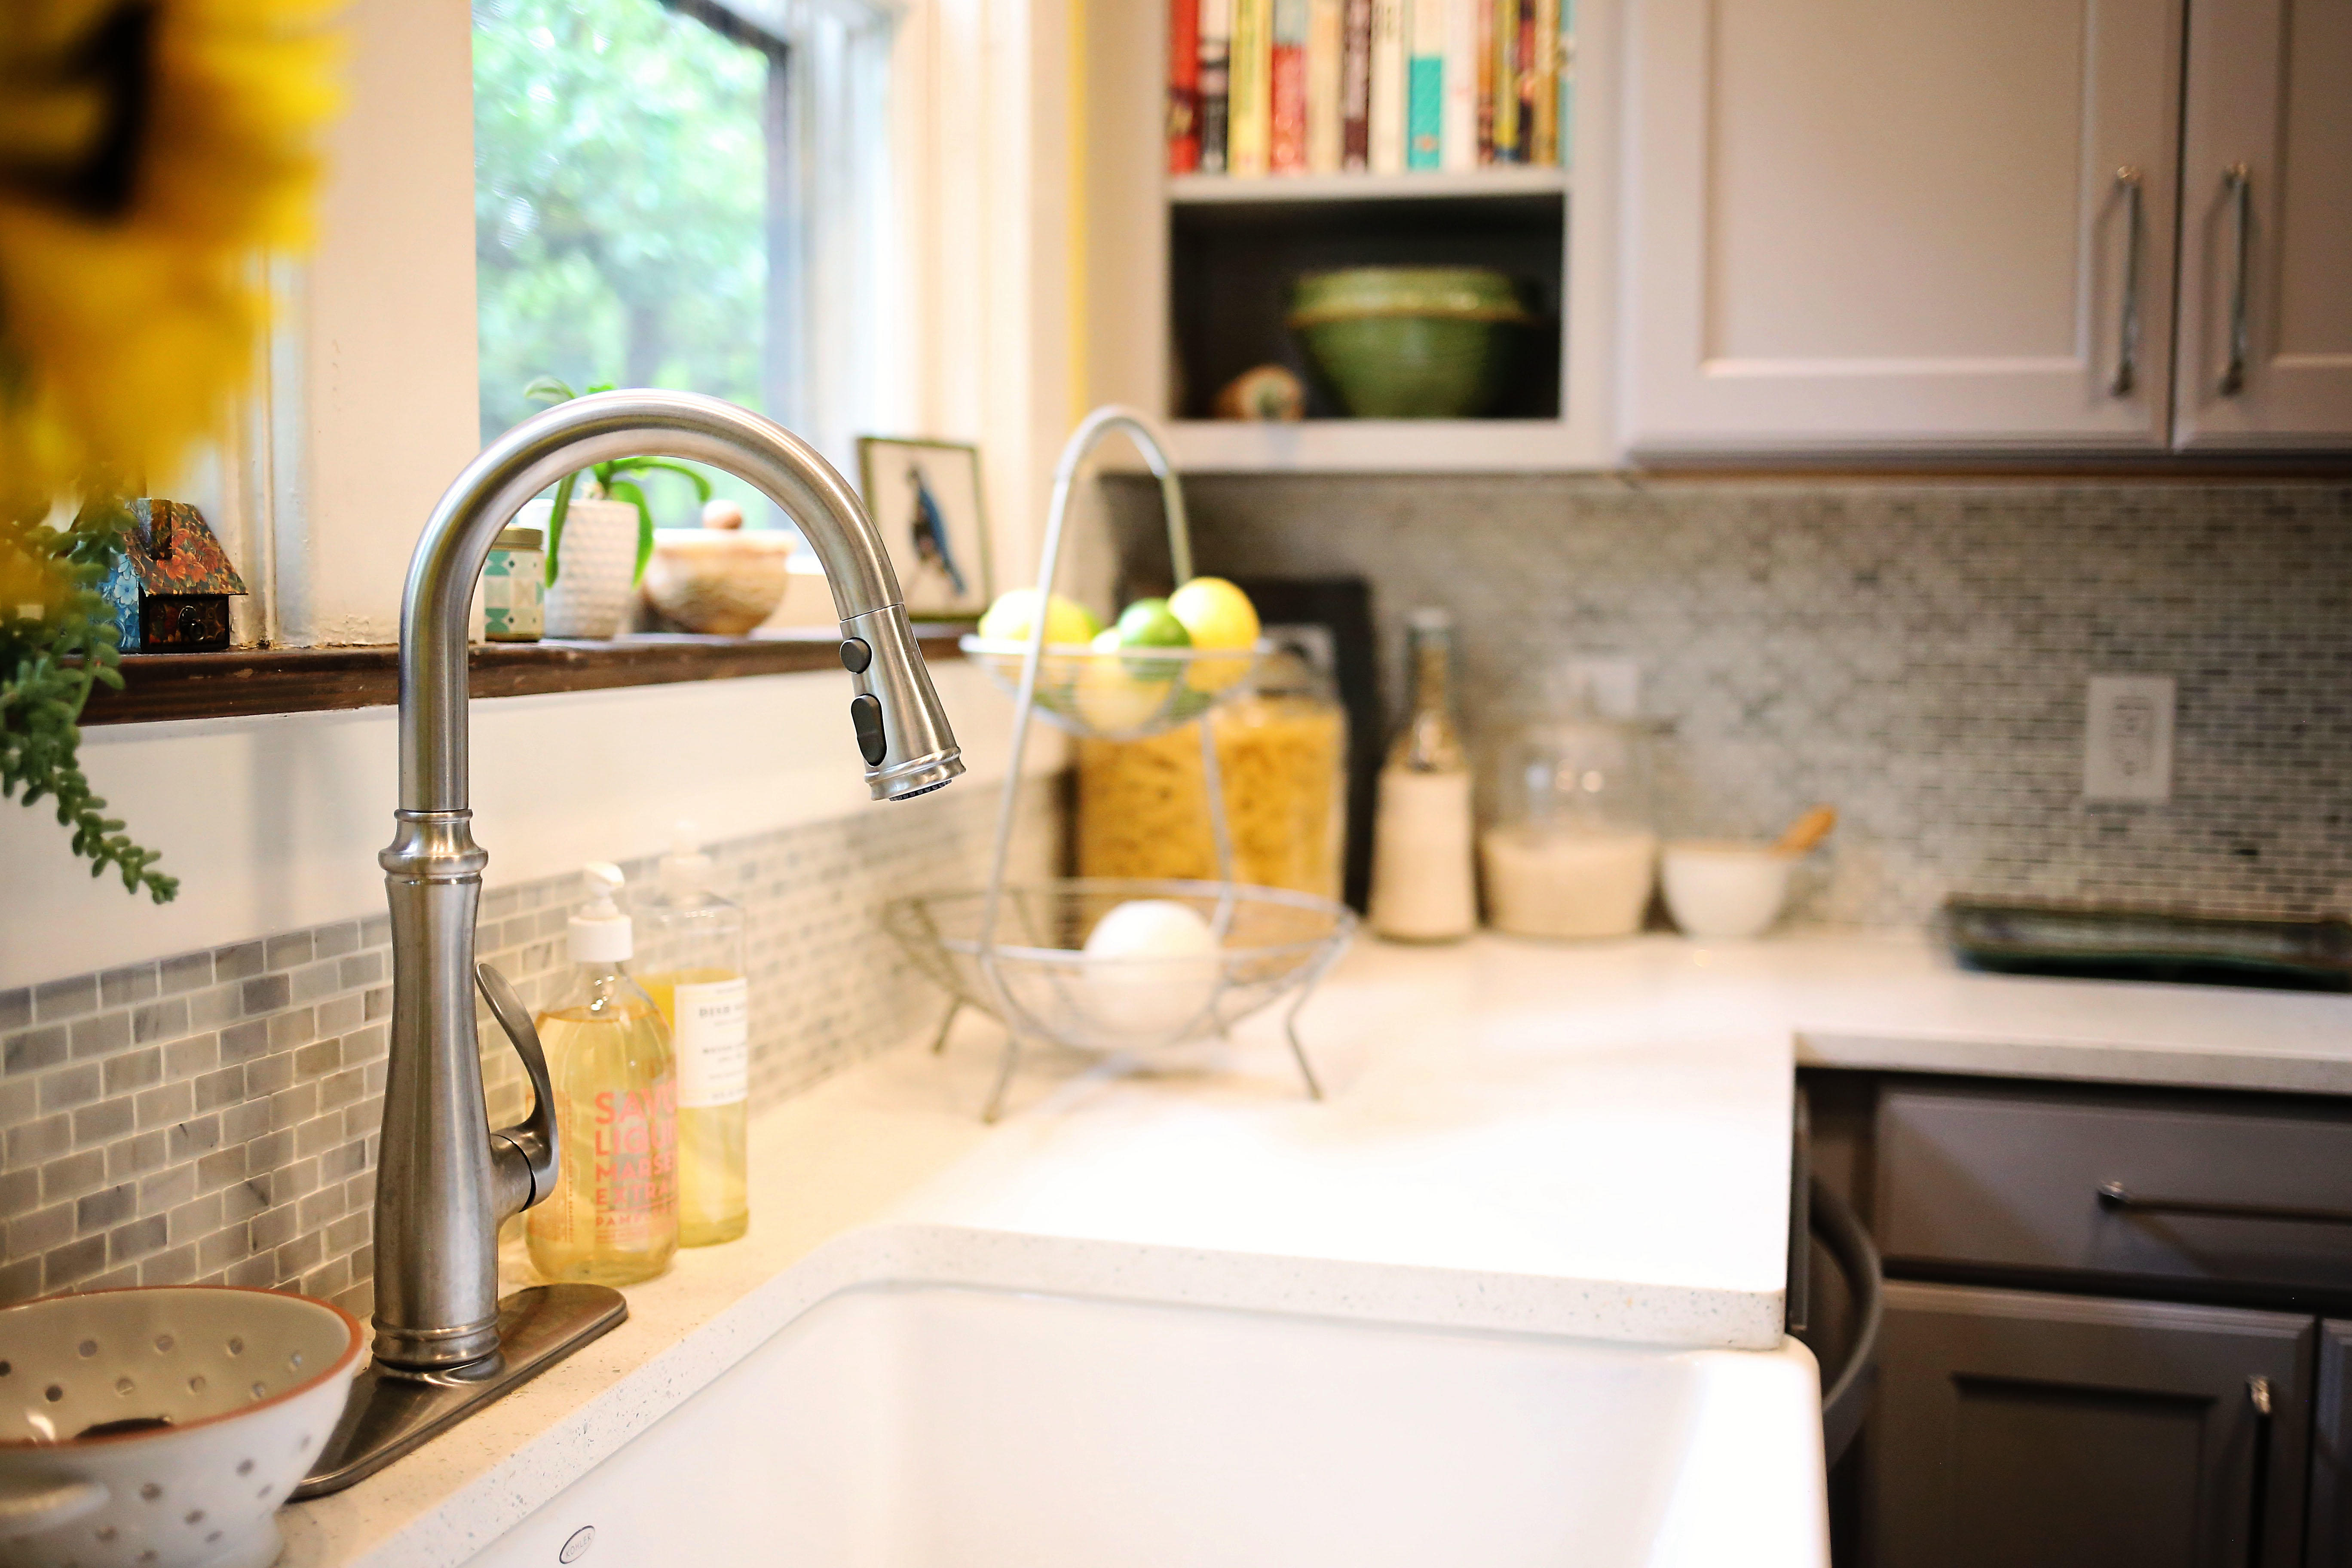 A kitchen faucet eye view of the sink and kitchen countertop landing area next to it emphasize how important it is to design a sink work area that has enough room to handle your every day kitchen activities.